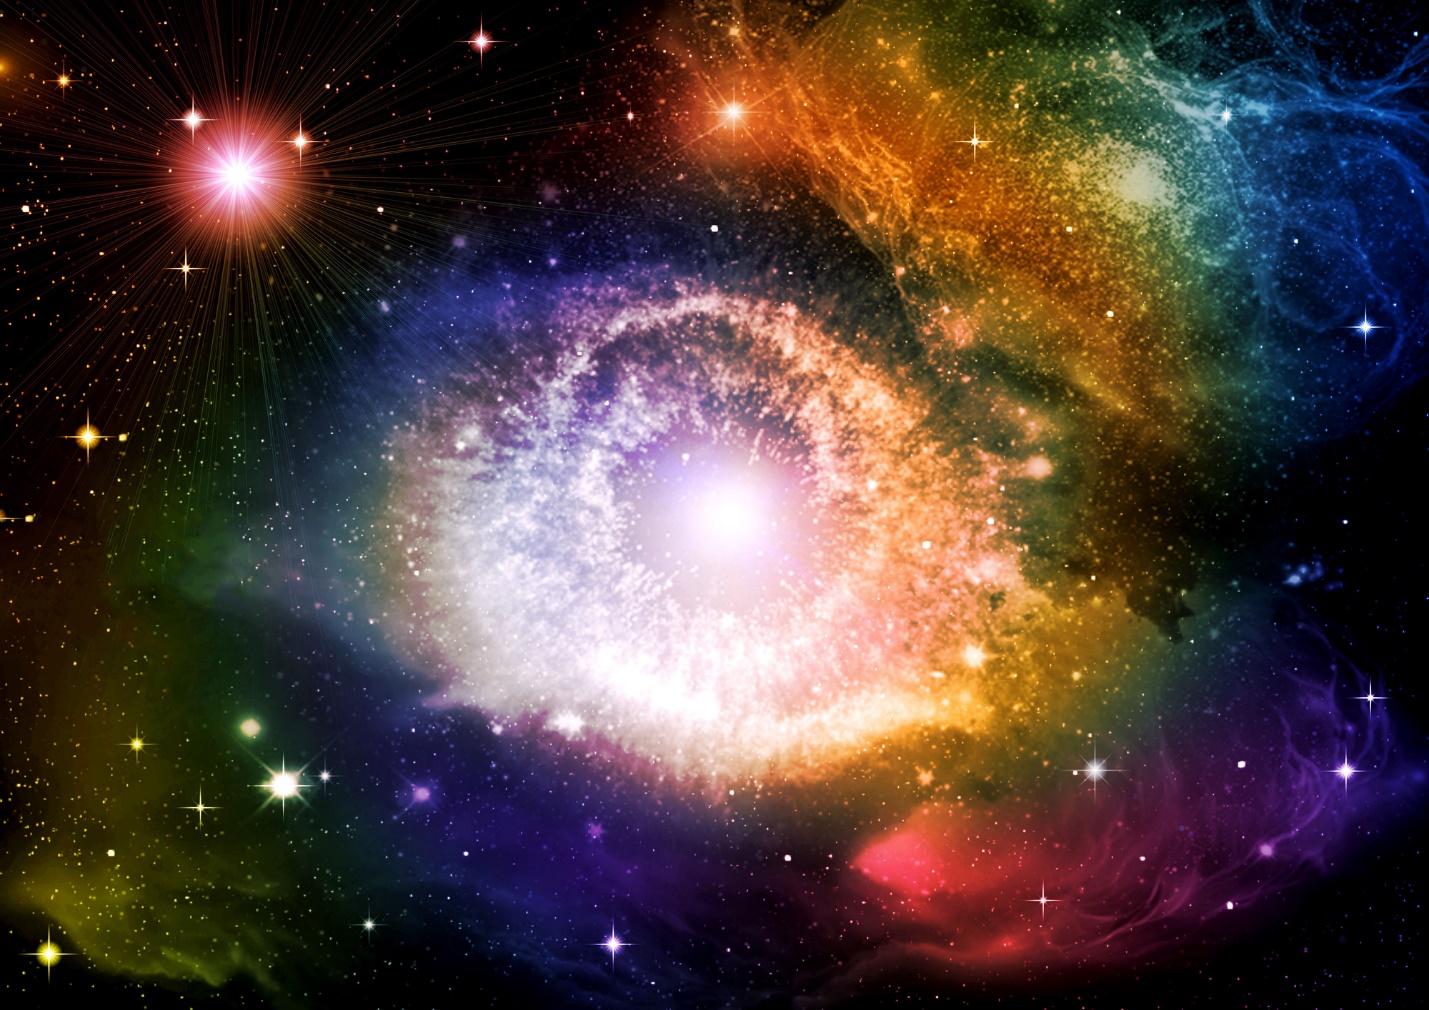 A colorful galaxy in space

Description automatically generated